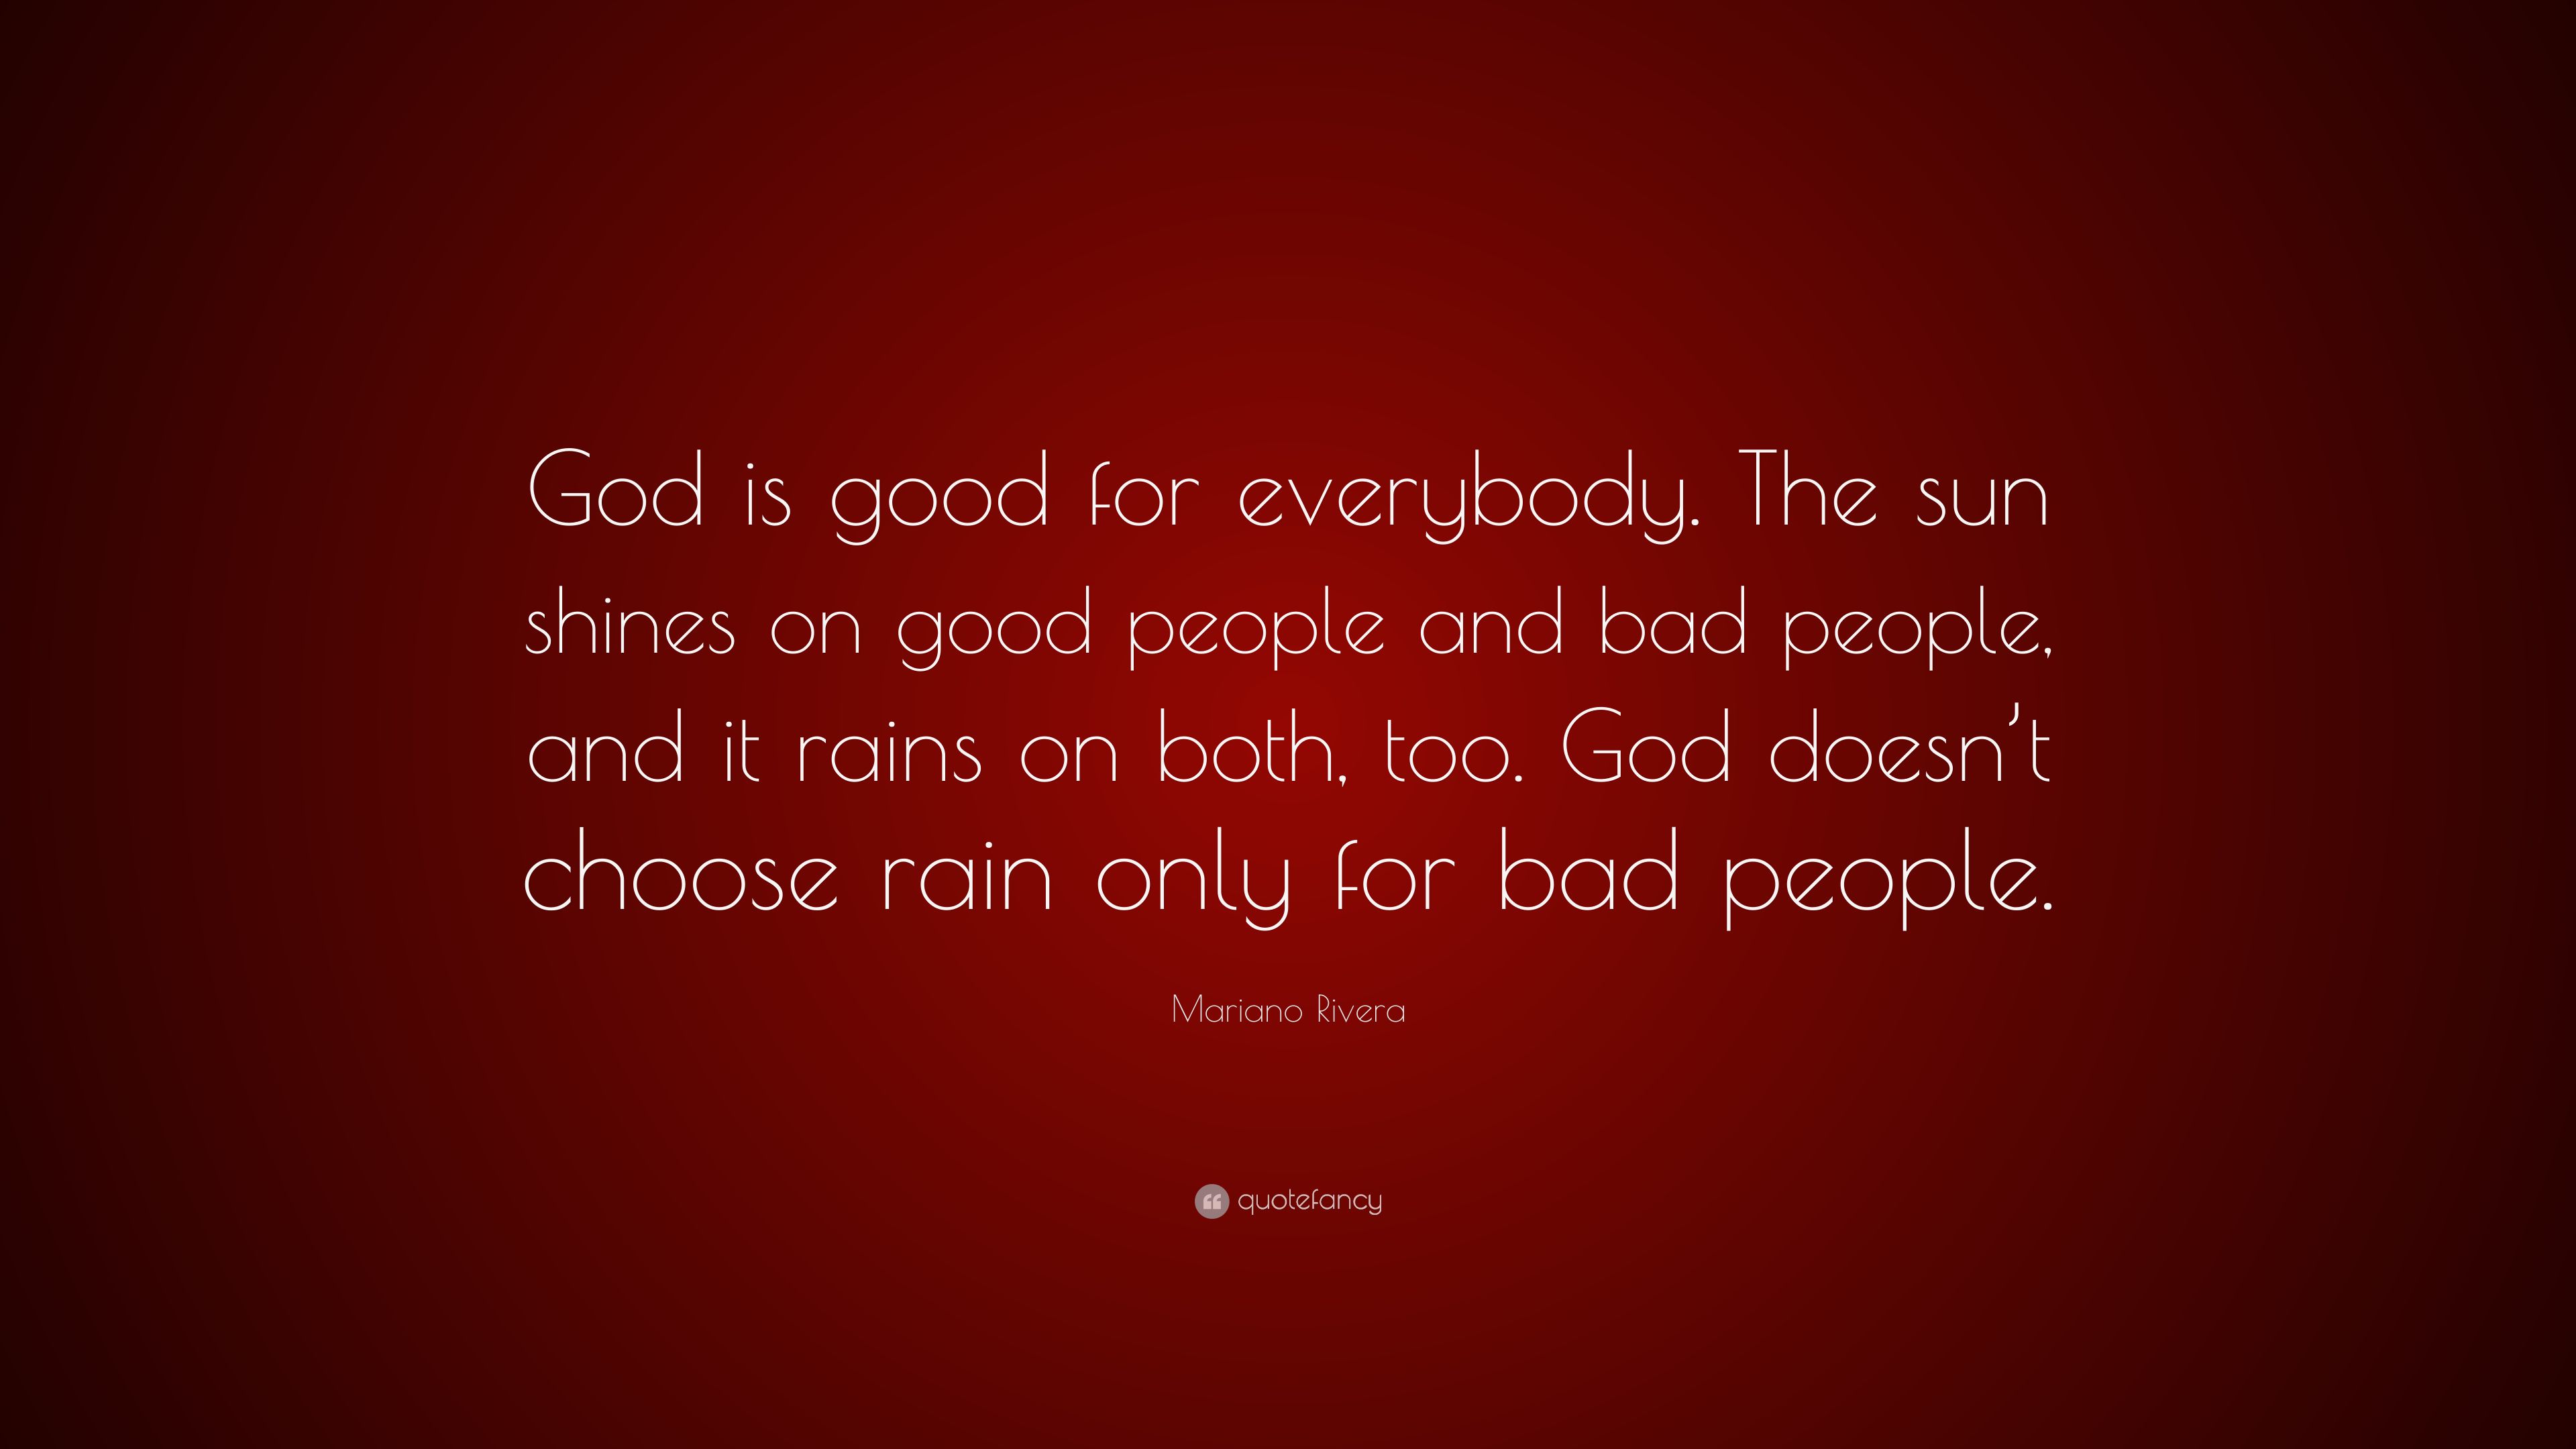 Mariano Rivera Quote: “God is good for everybody. The sun shines on good people and bad people, and it rains on both, too. God doesn't choose r.” (7 wallpaper)